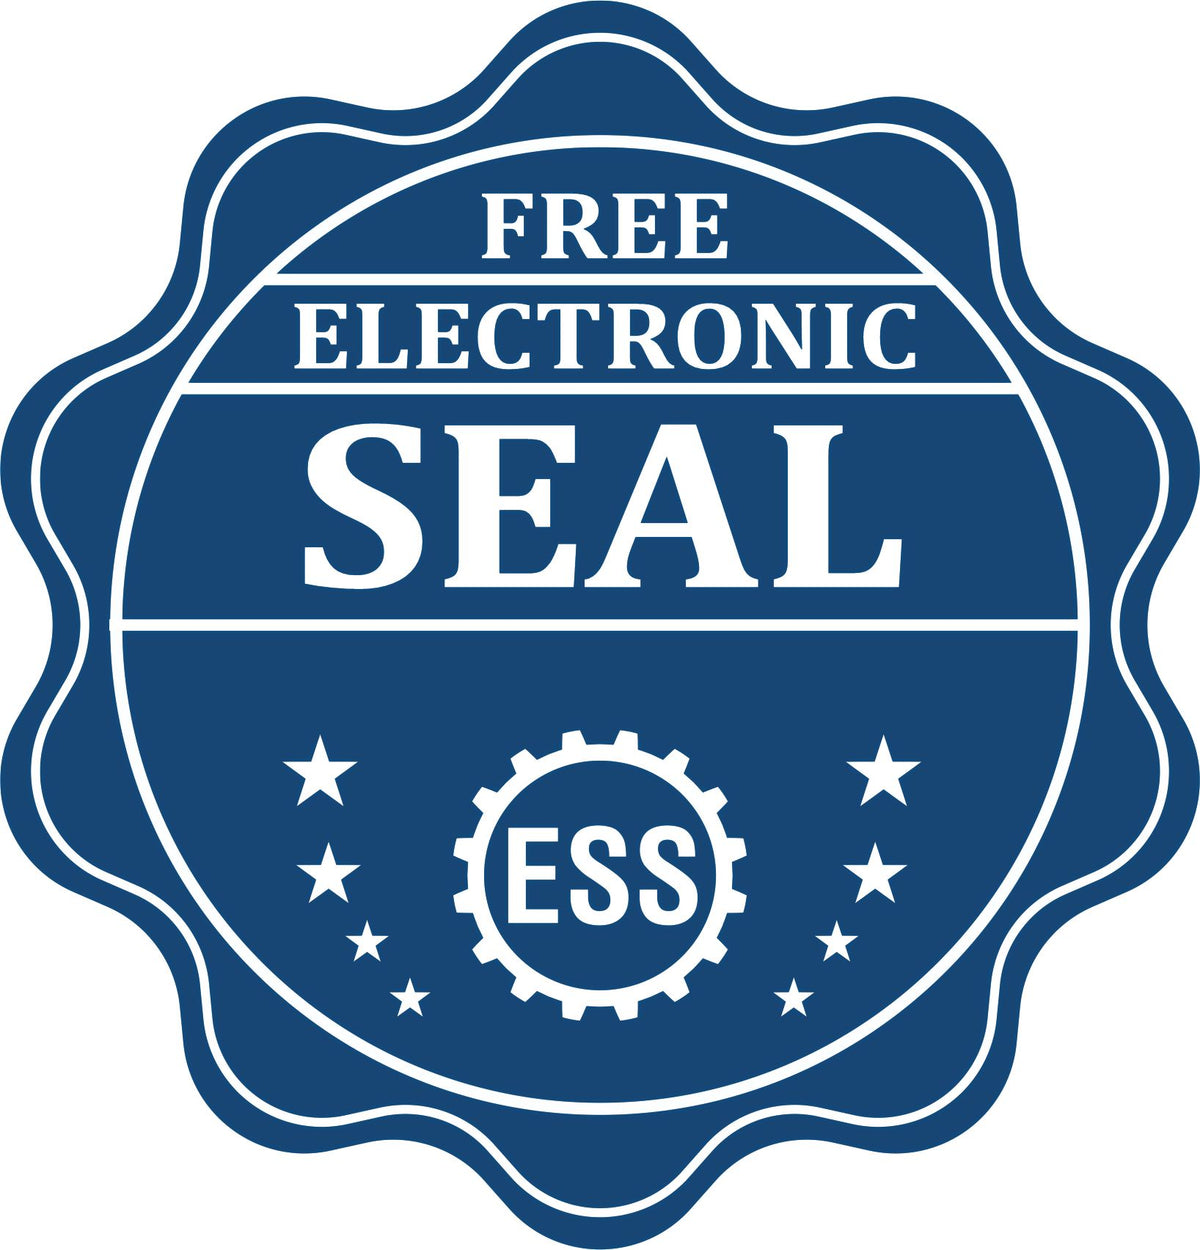 A badge showing a free electronic seal for the Handheld Louisiana Professional Geologist Embosser with stars and the ESS gear on the emblem.